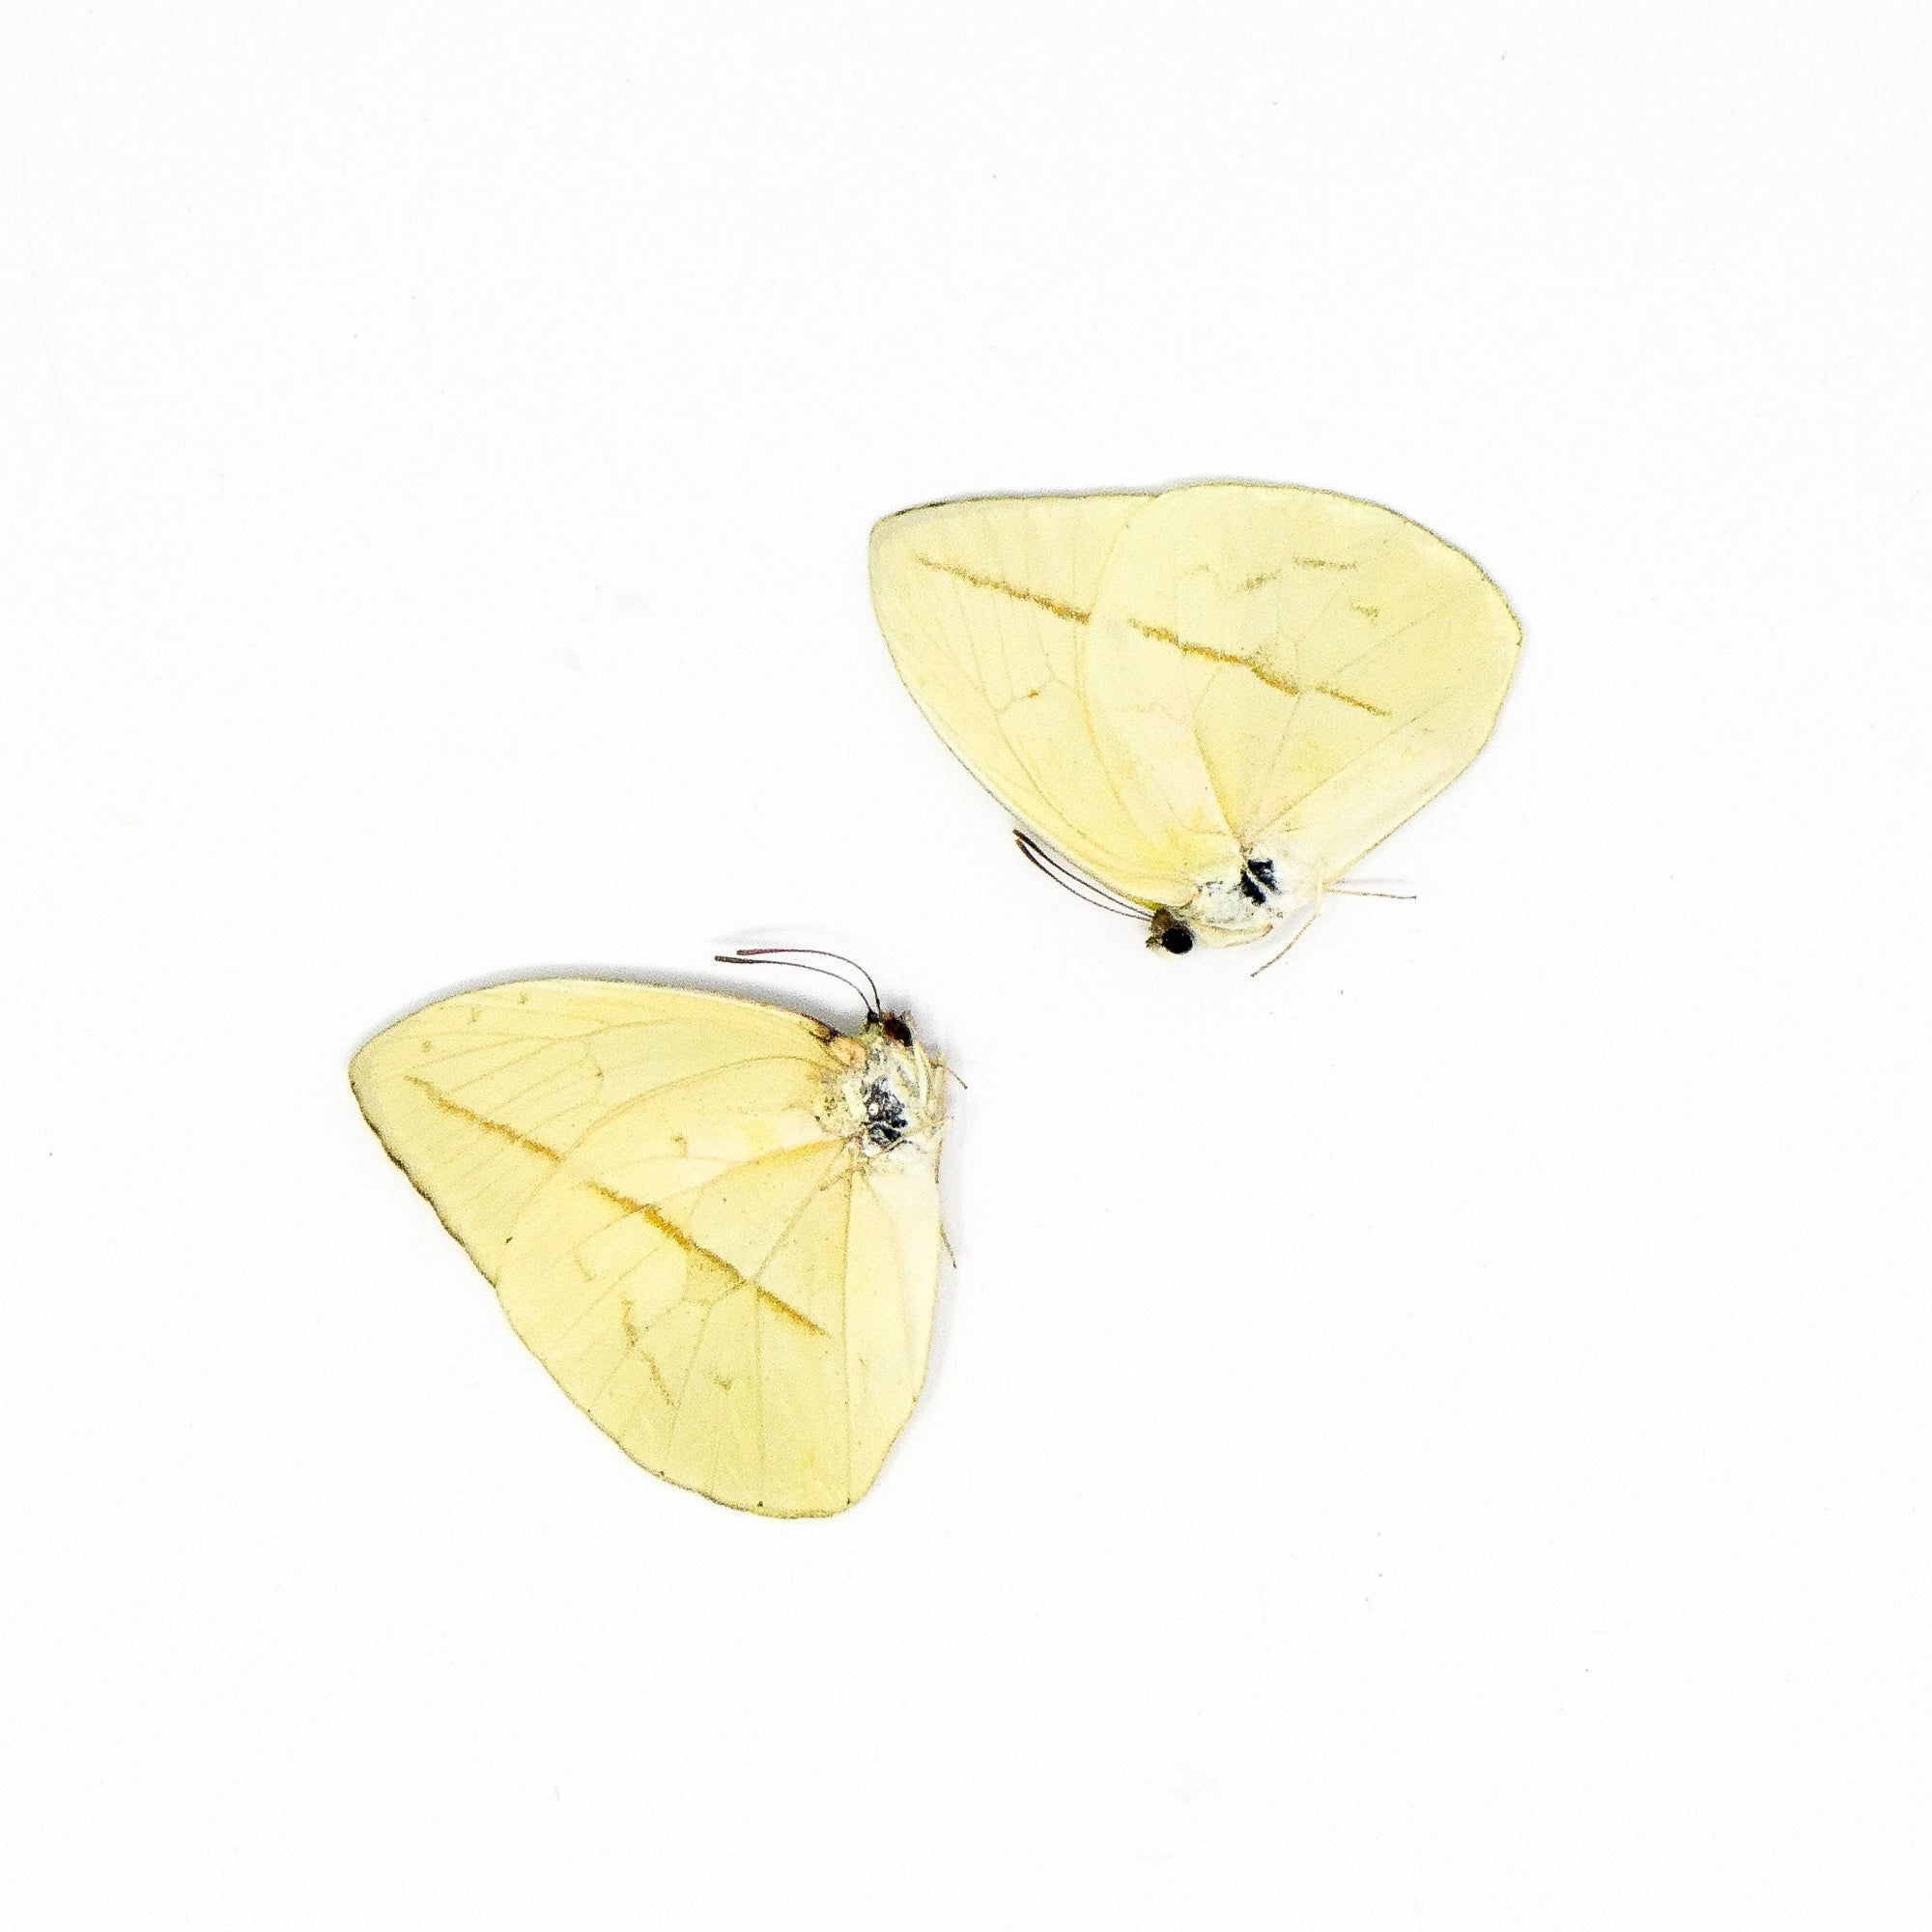 TWO (2) Phoebis trite | A1 Real Dry-Preserved Butterflies | Unmounted Entomology Taxidermy Specimens